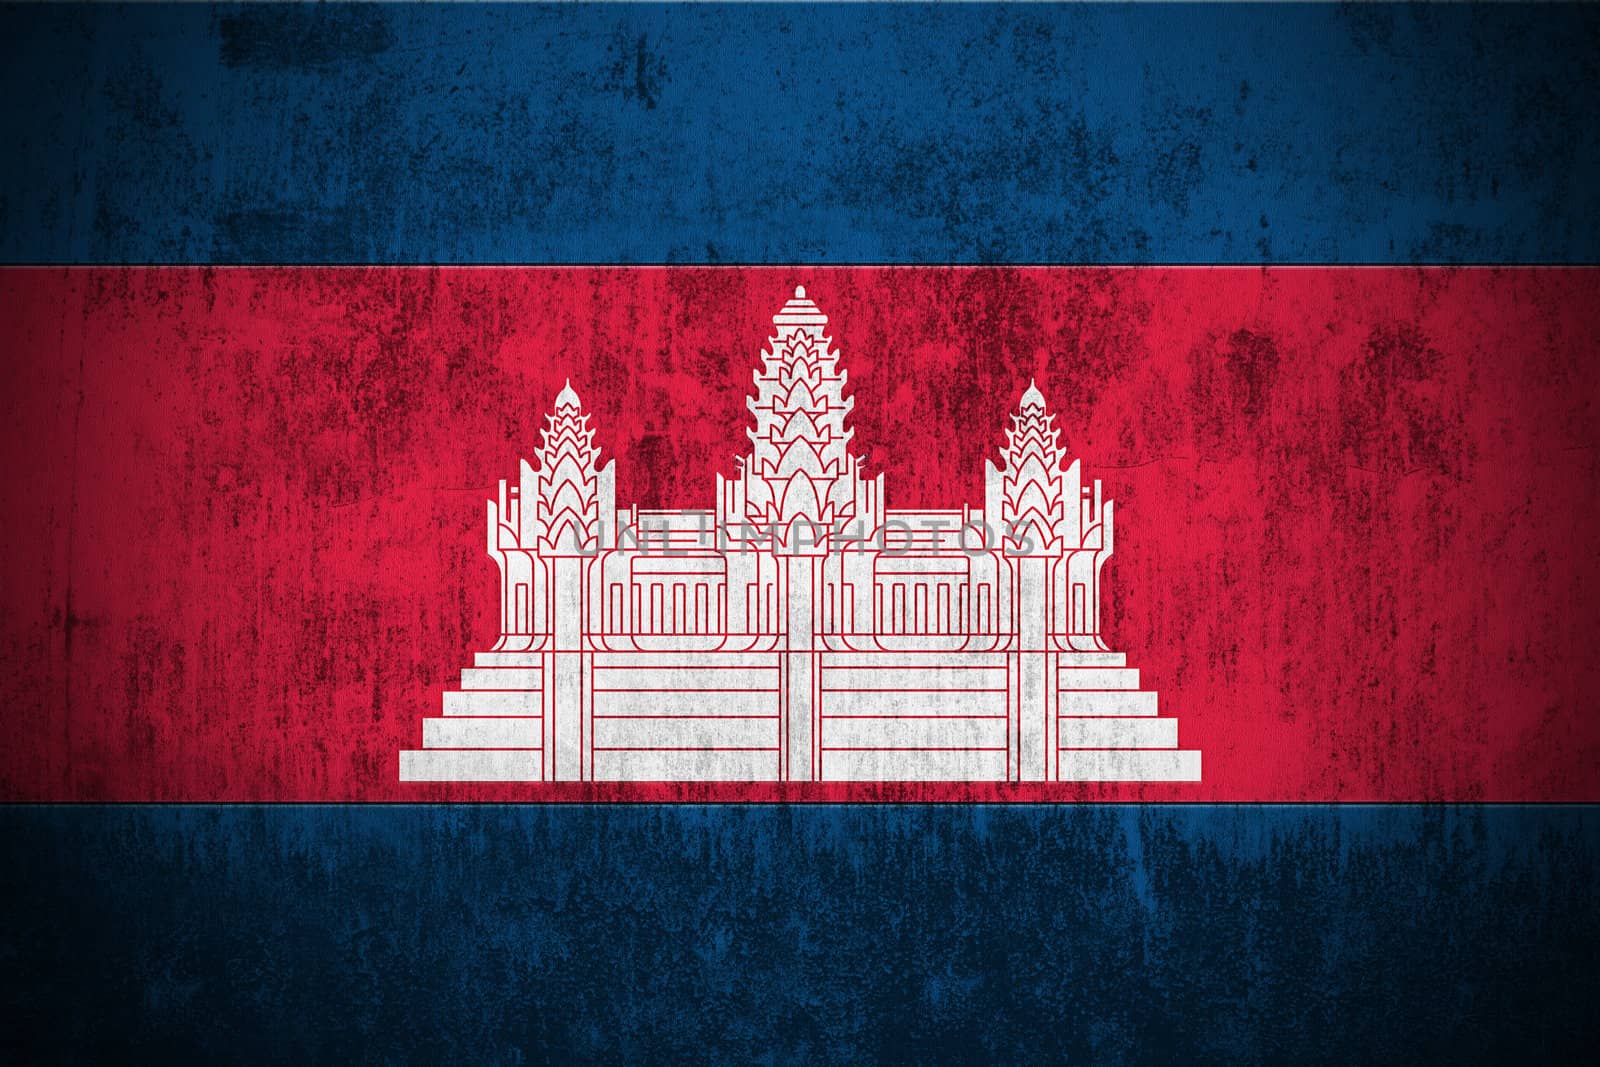 Weathered Flag Of Cambodia, fabric textured
